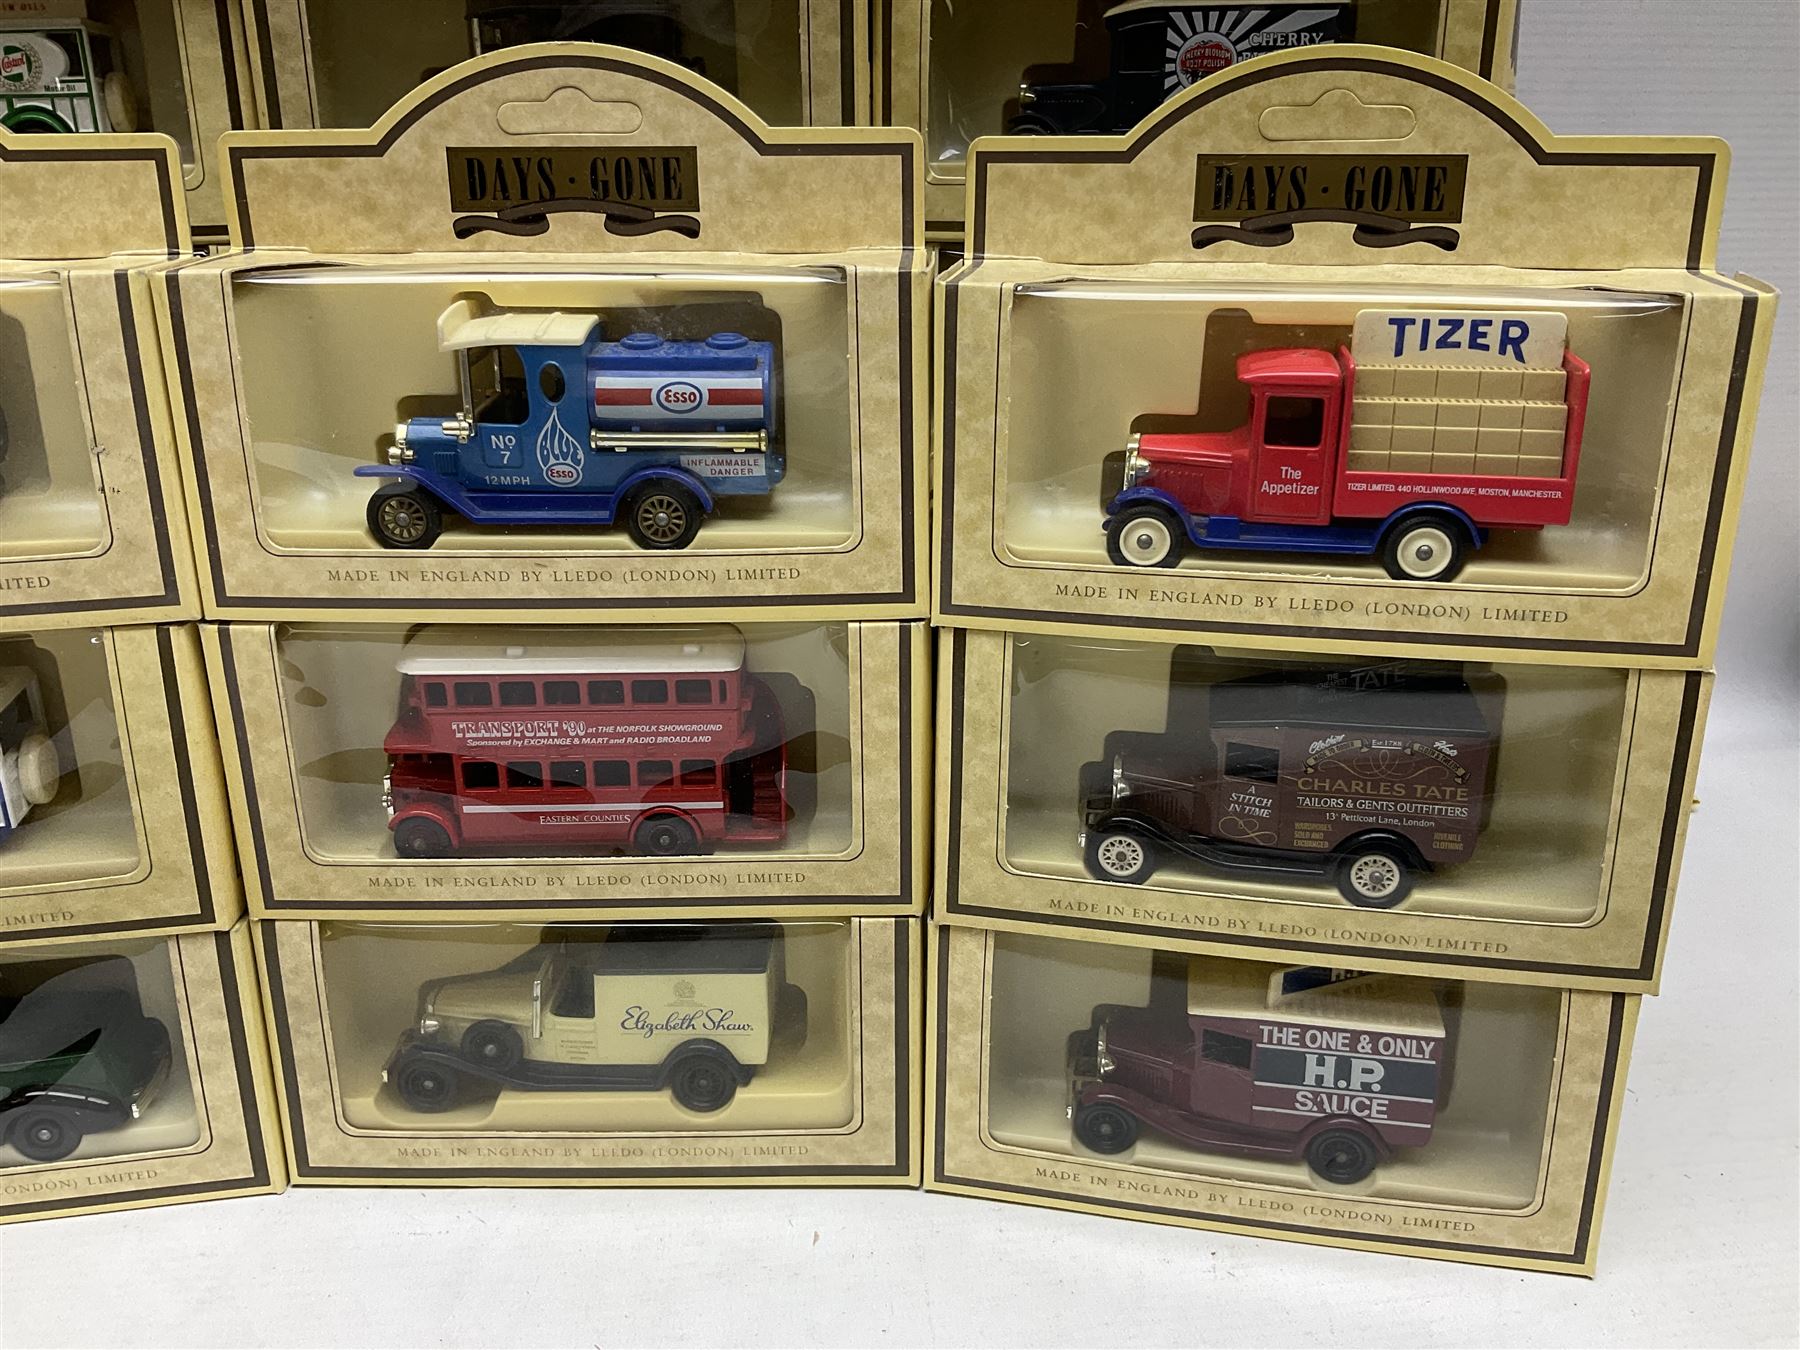 Sixty-two Lledo/ Days Gone die-cast models - Image 14 of 14